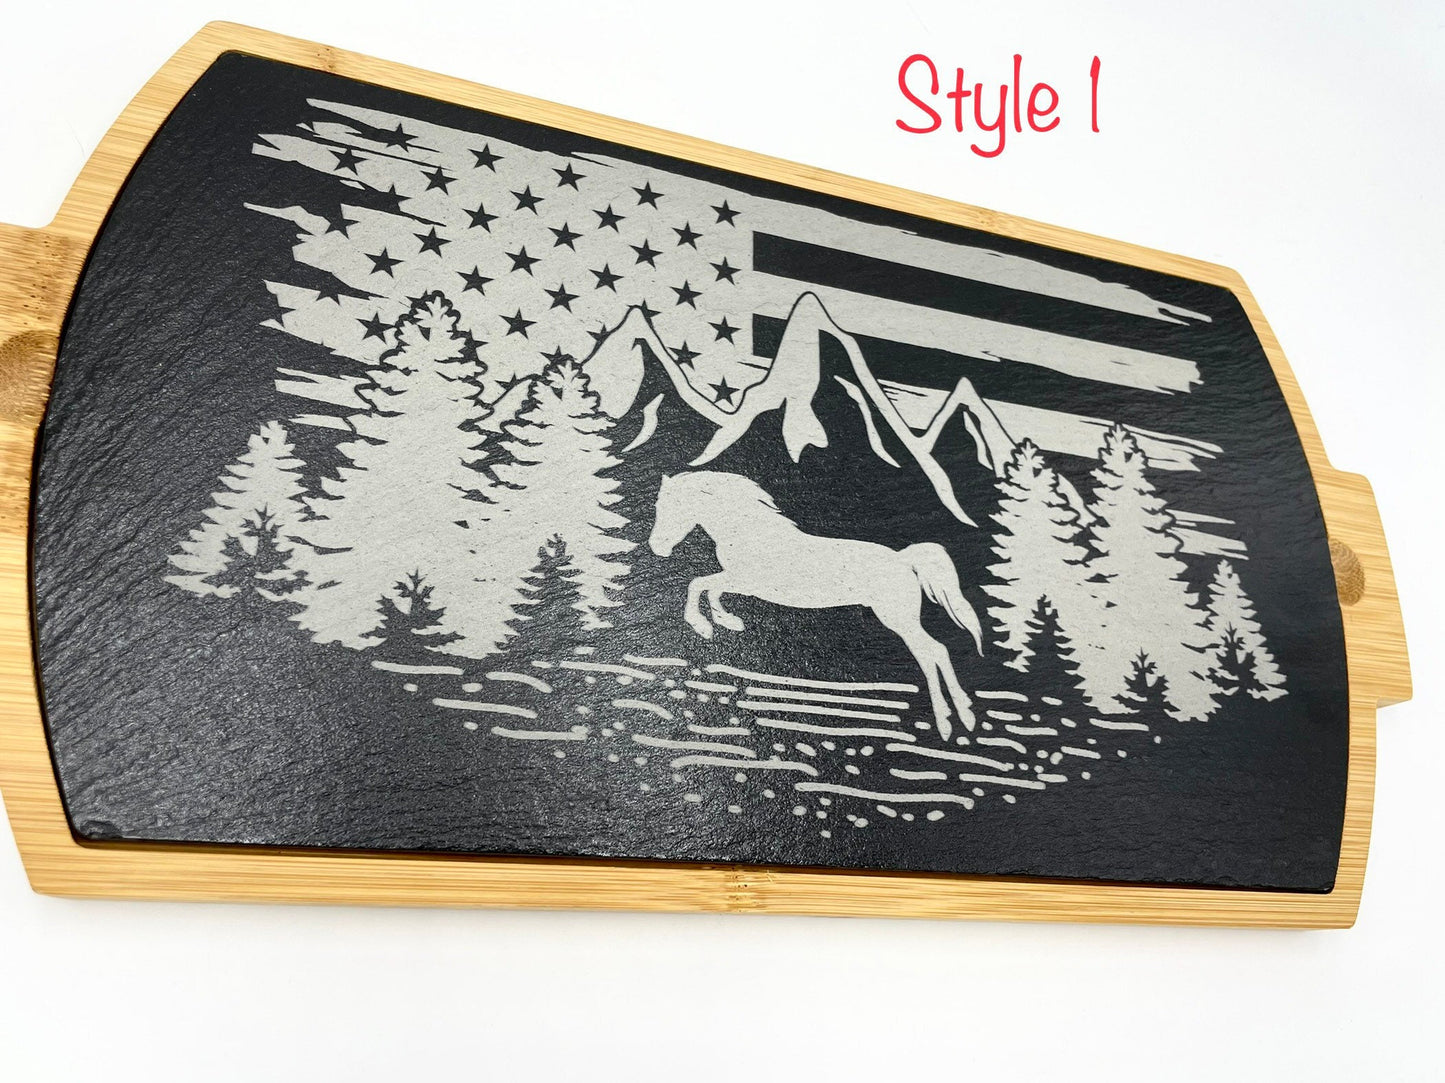 Engraved slate charcuterie board with horse, mountains, trees and american flag. Bamboo on the outside edges. Slate serving tray